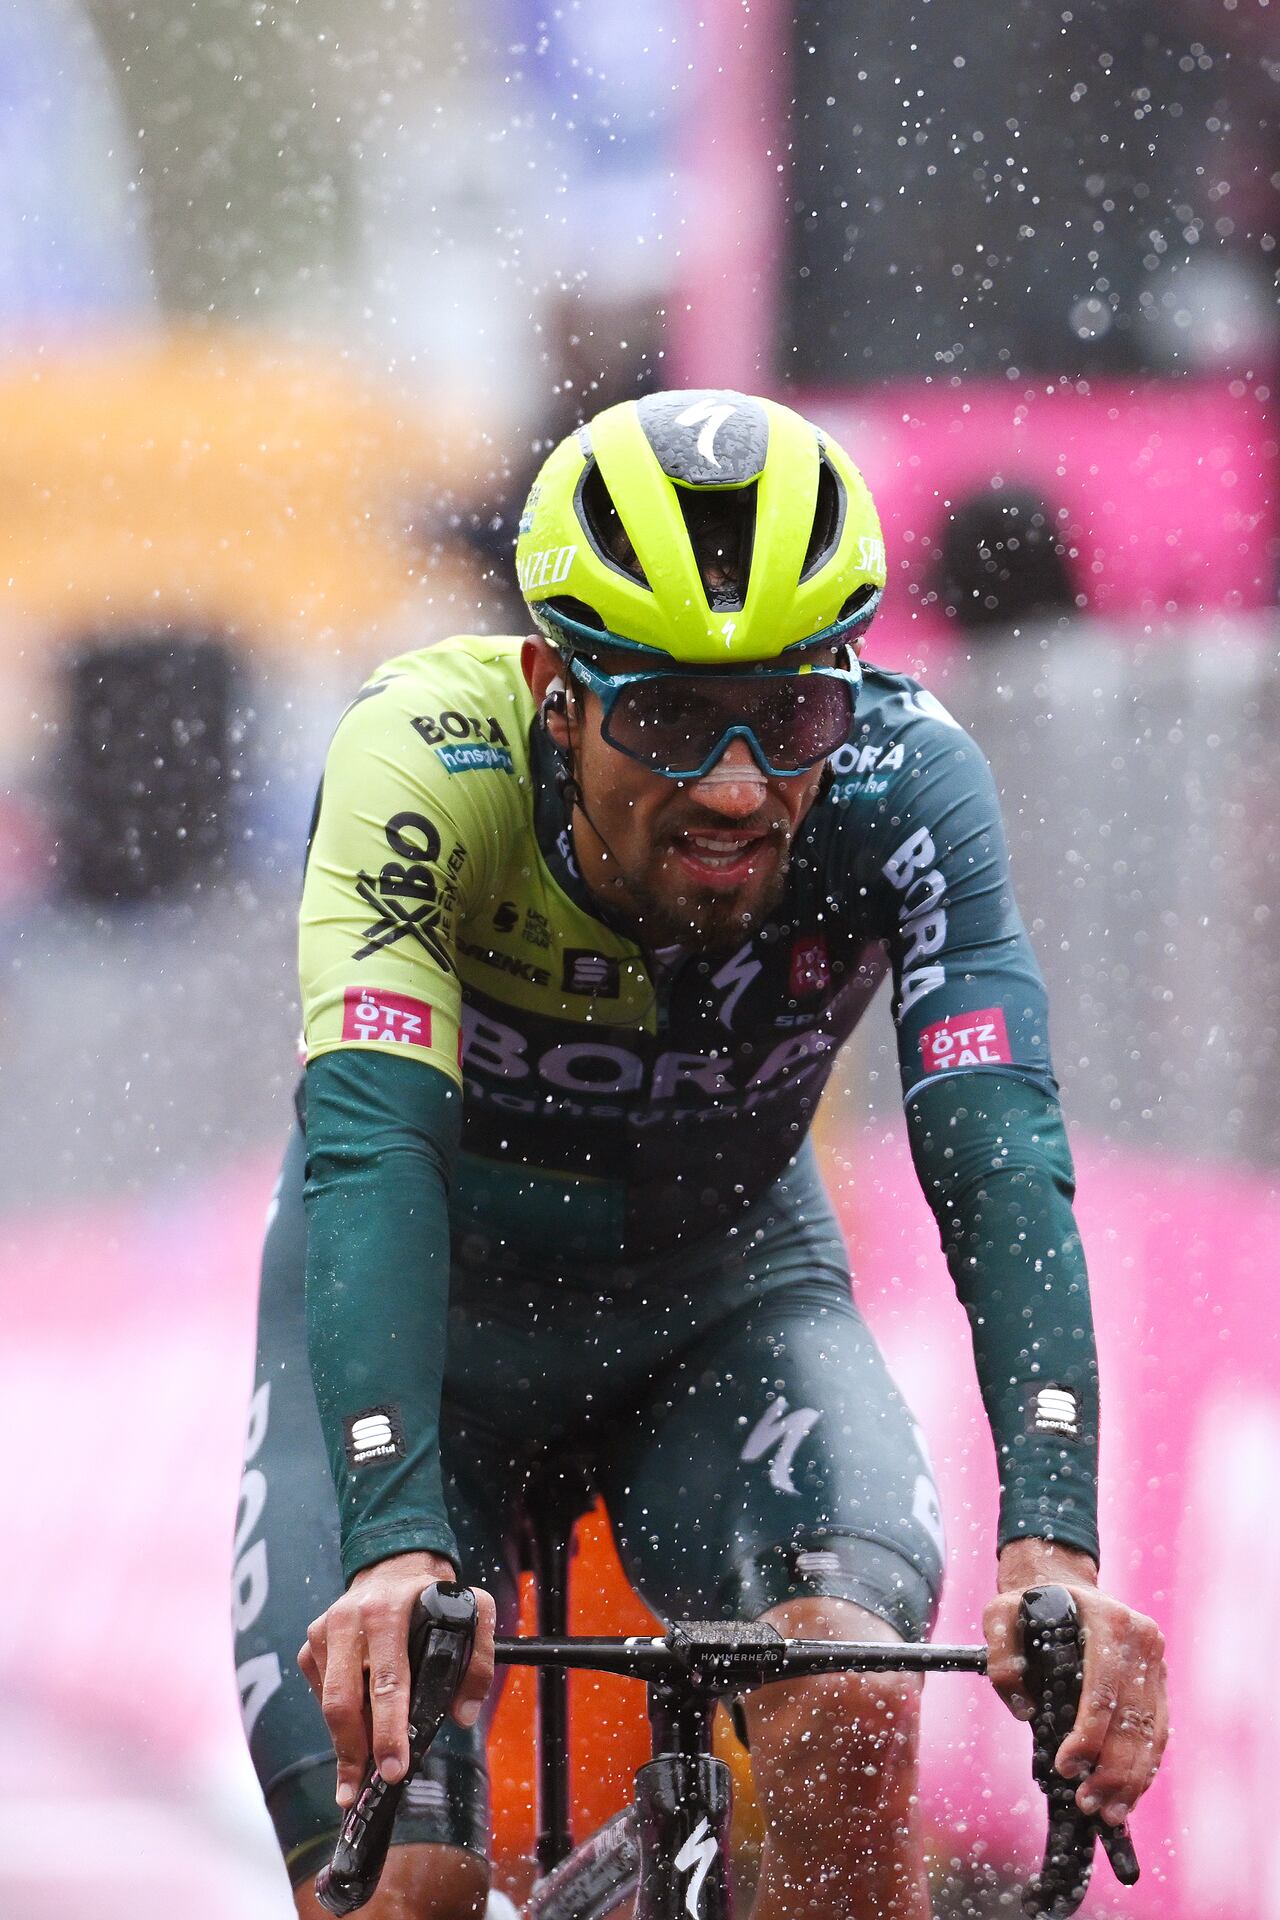 SANTA CRISTINA VALGARDENA - MONTE PANA, ITALY - MAY 21: (EDITOR'S NOTE: Alternate crop) Daniel Martinez of Colombia and Team BORA - hansgrohe crosses the finish line on third place during the 107th Giro d'Italia 2024, Stage 16 a 118.7km stage from Lasa - Laas to Santa Cristina Valgardena - Monte Pana 1625m / Route and stage modified due to adverse weather conditions / #UCIWT / on May 21, 2024 in Santa Cristina Valgardena - Monte Pana, Italy. (Photo by Dario Belingheri/Getty Images)